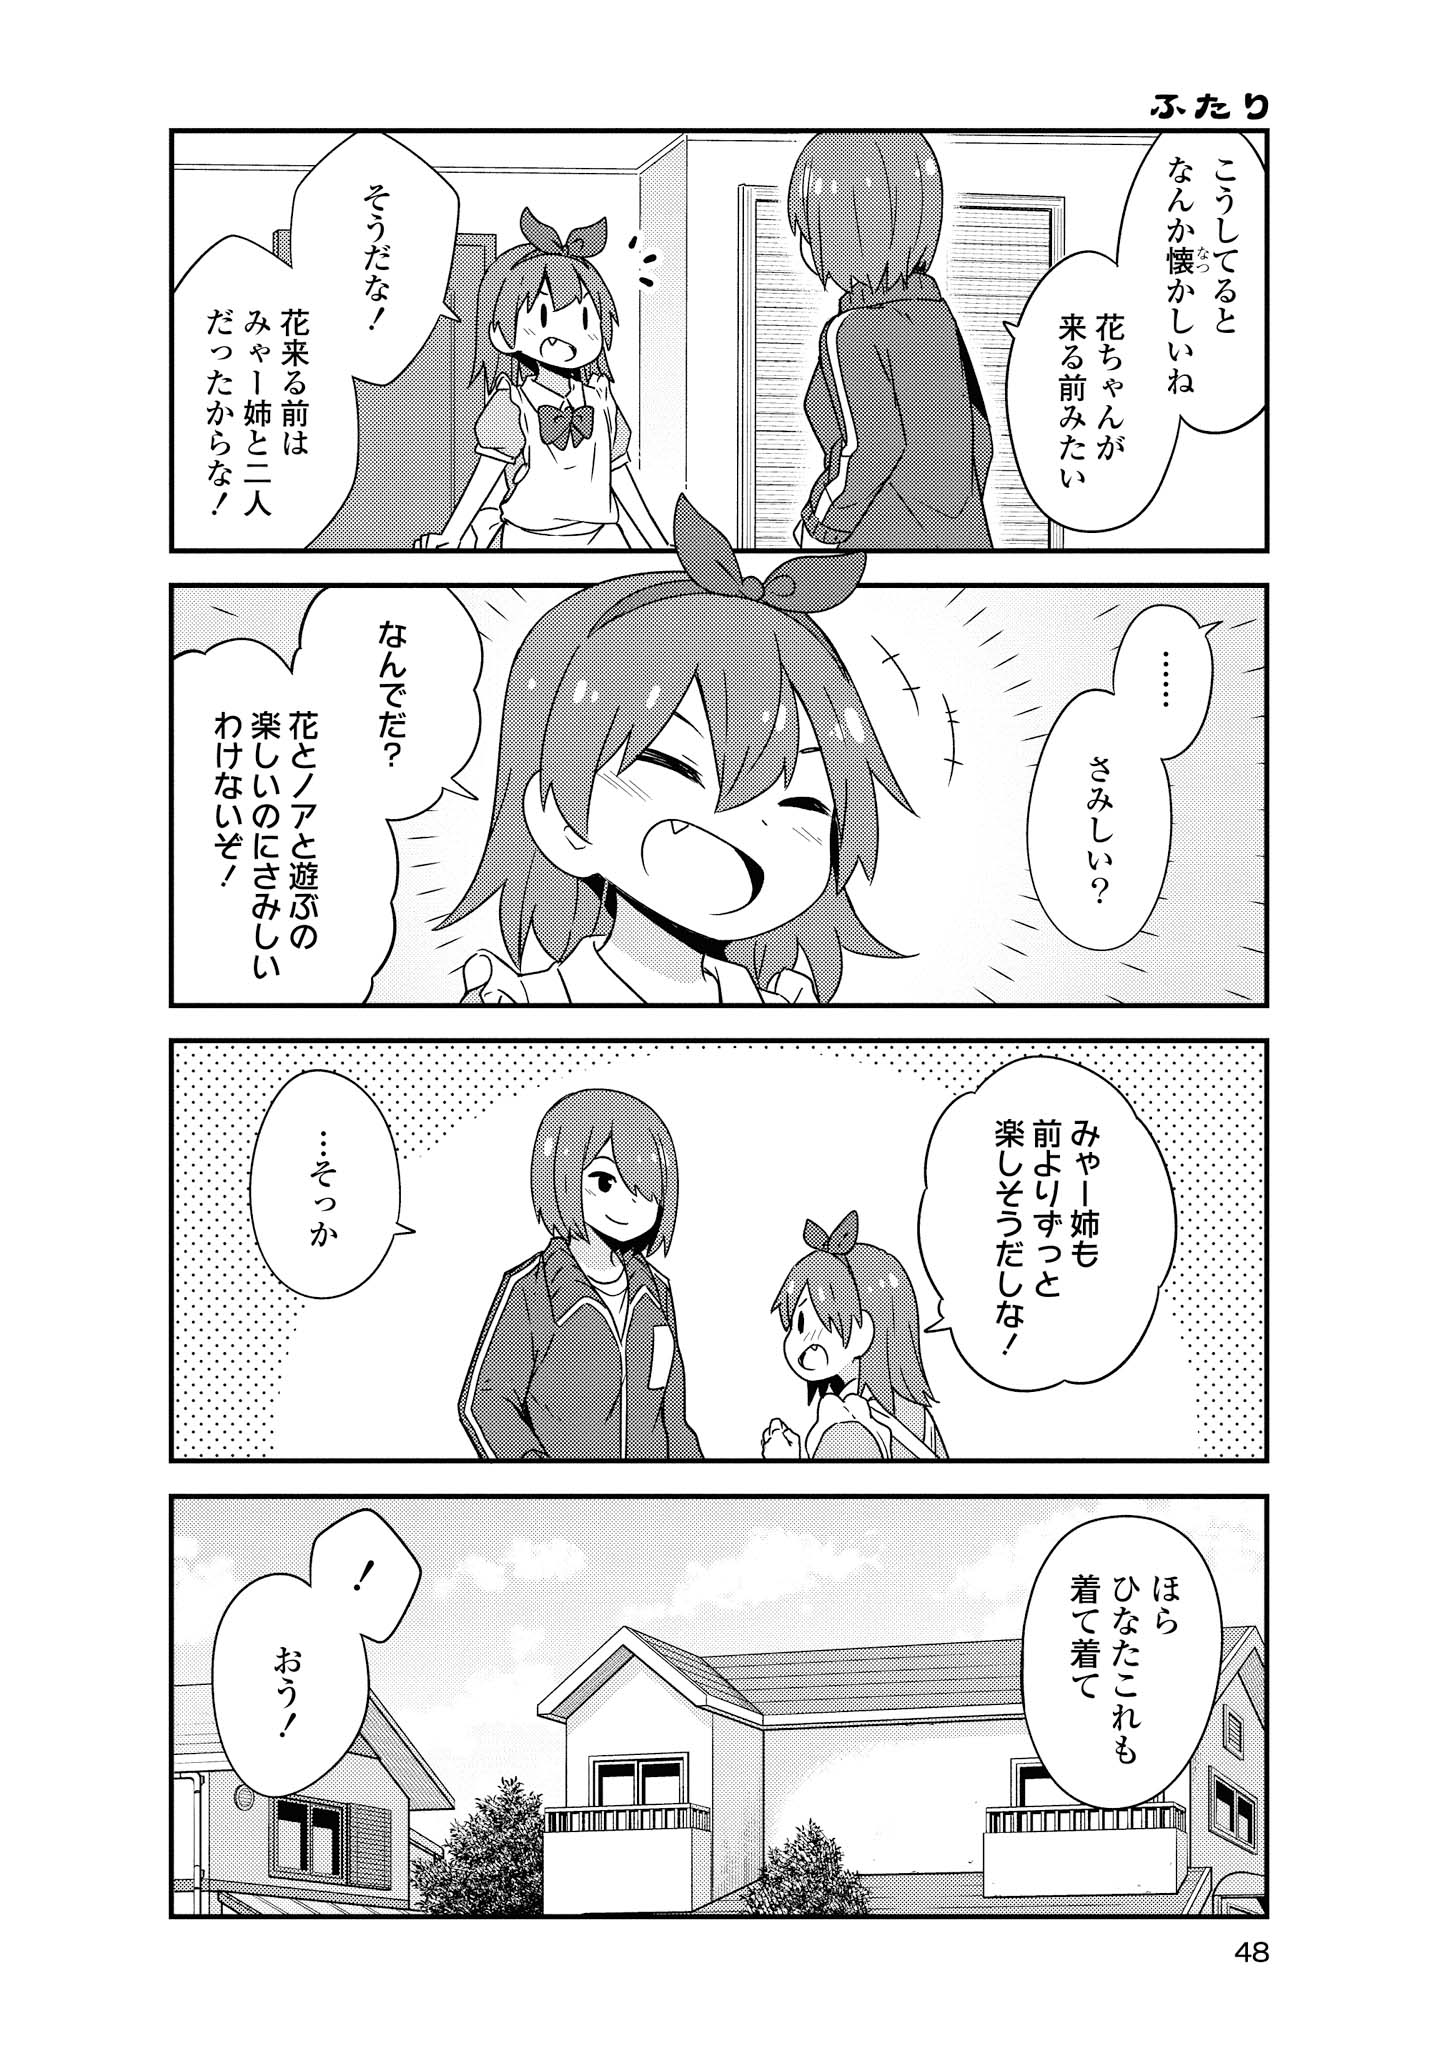 Wataten! An Angel Flew Down to Me 私に天使が舞い降りた！ 第46話 - Page 6